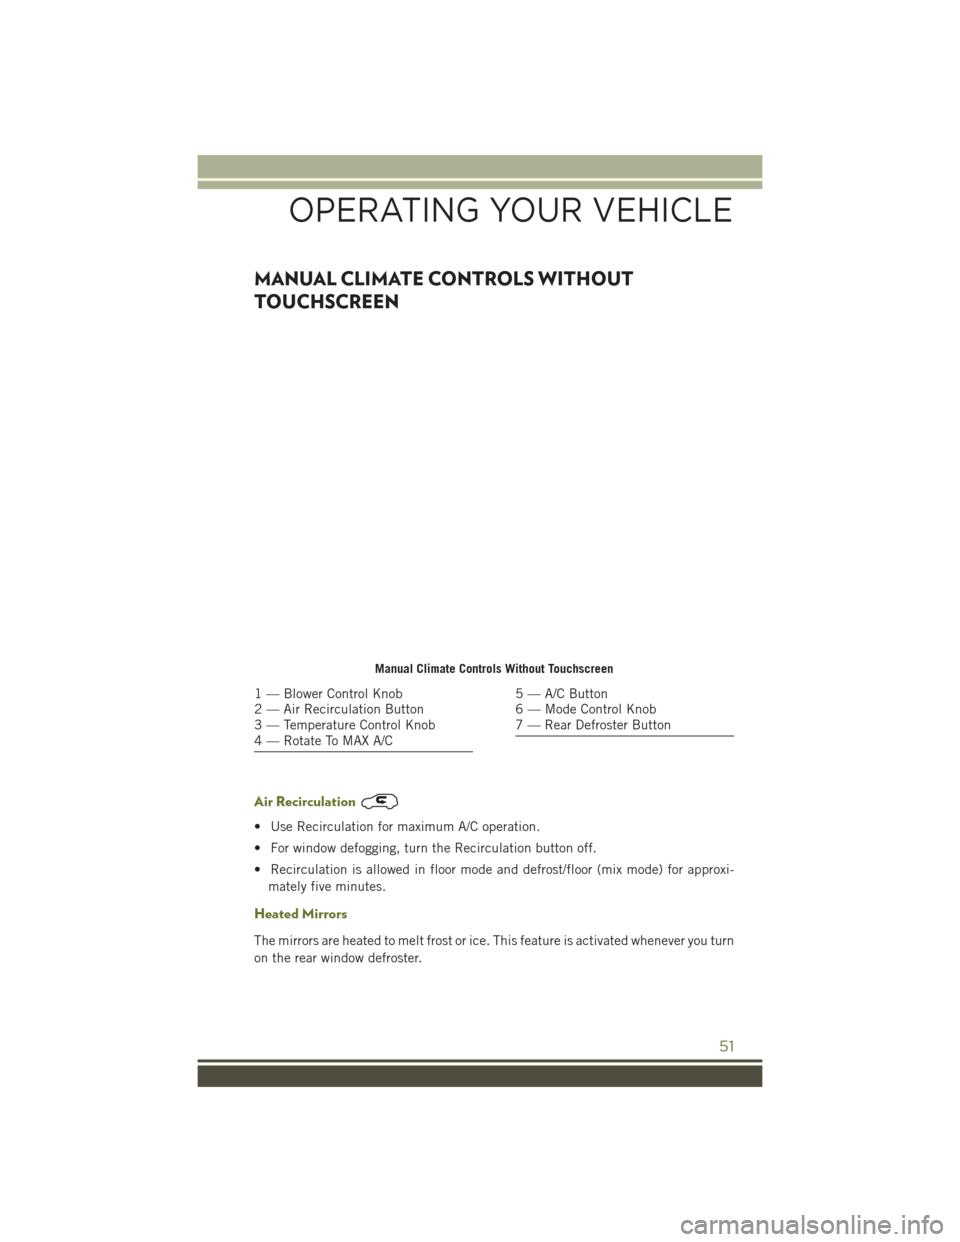 JEEP CHEROKEE 2016 KL / 5.G User Guide MANUAL CLIMATE CONTROLS WITHOUT
TOUCHSCREEN
Air Recirculation
• Use Recirculation for maximum A/C operation.
• For window defogging, turn the Recirculation button off.
• Recirculation is allowed